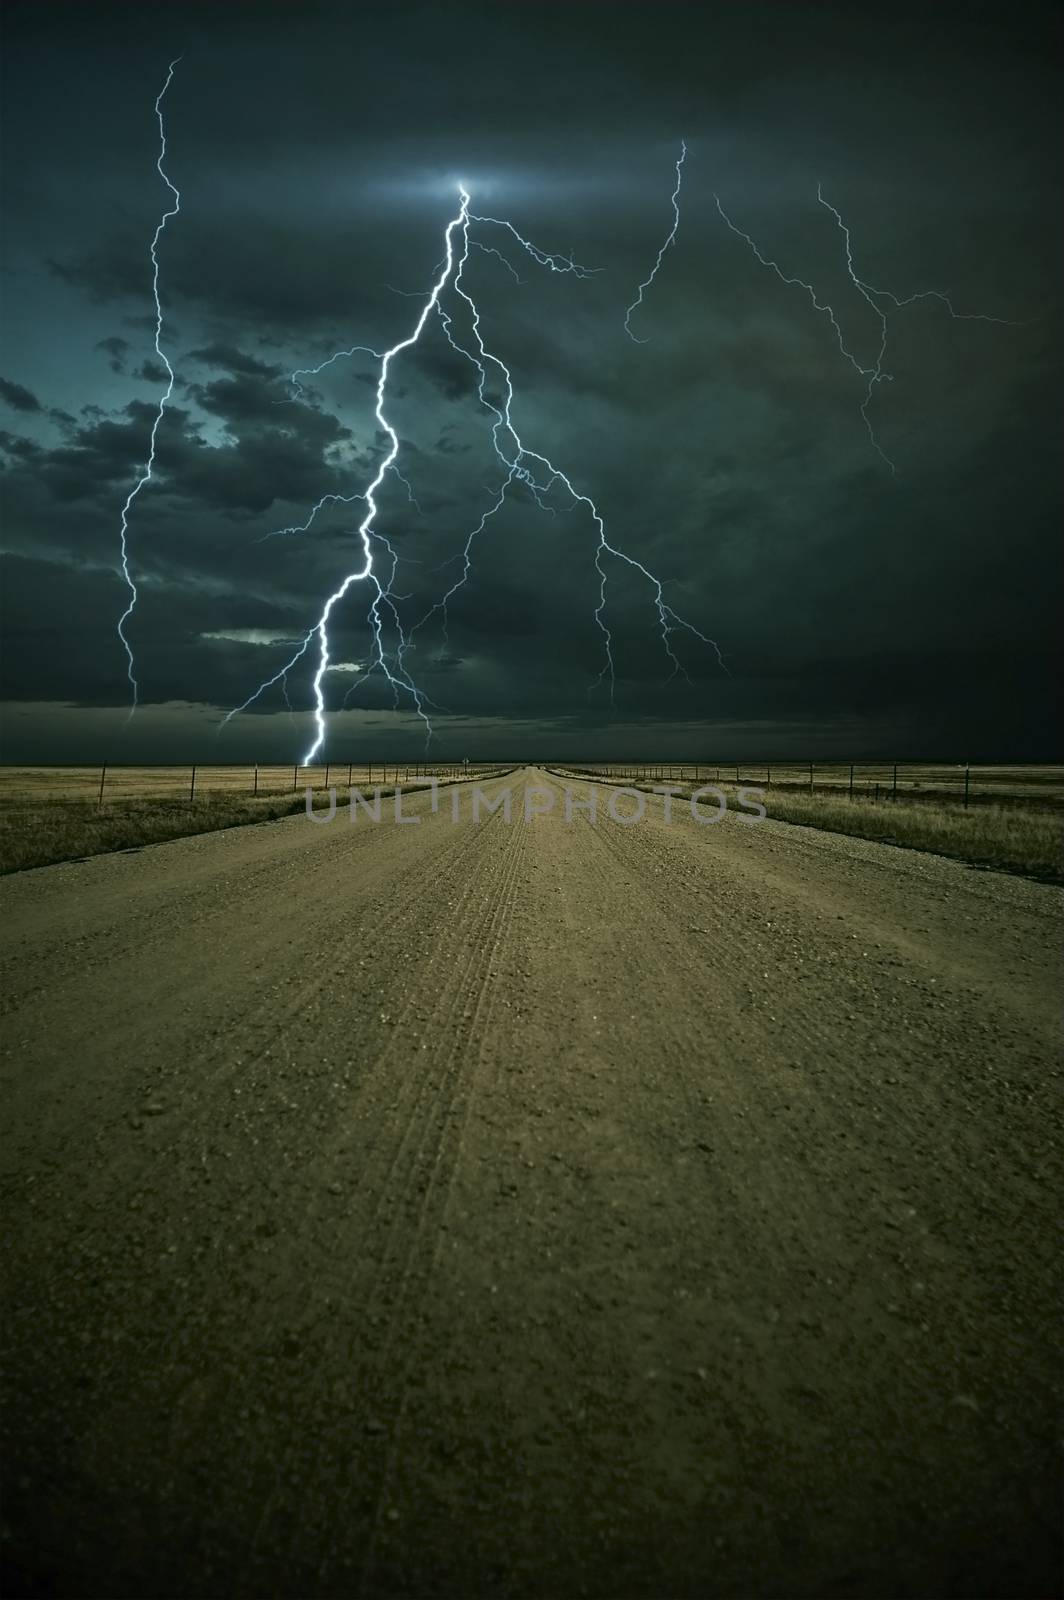 Lightning Storm Ahead - Colorado Plains Outback Road with Lightning Storm Ahead. Vertical Image. Nature Photo Collection.